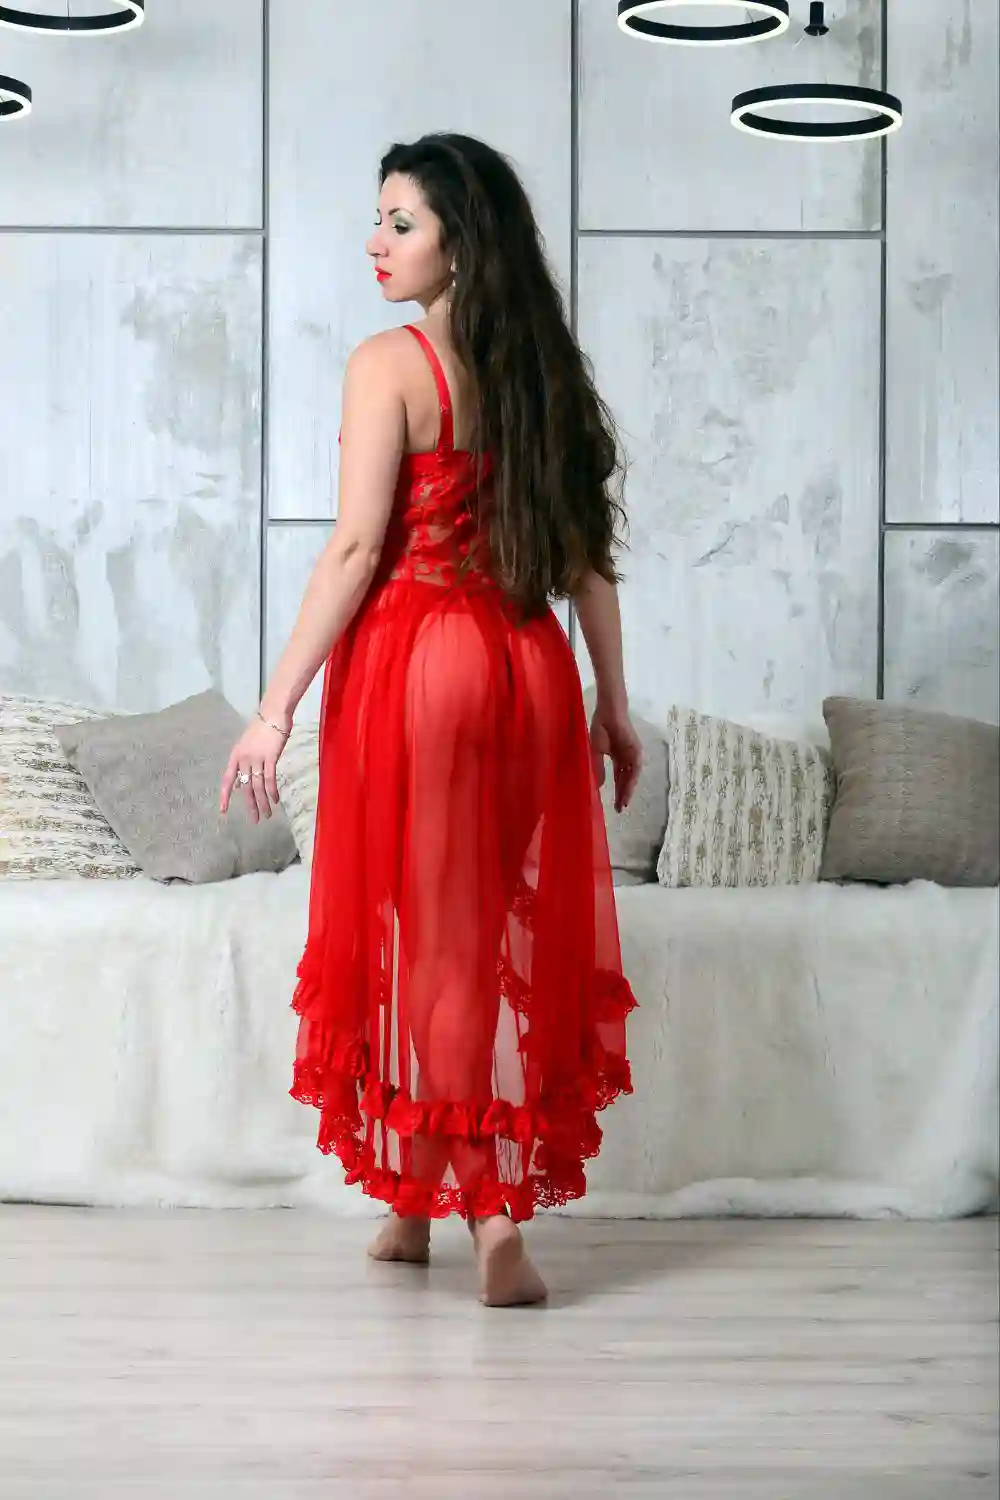 Woman in Sheer Red Dress